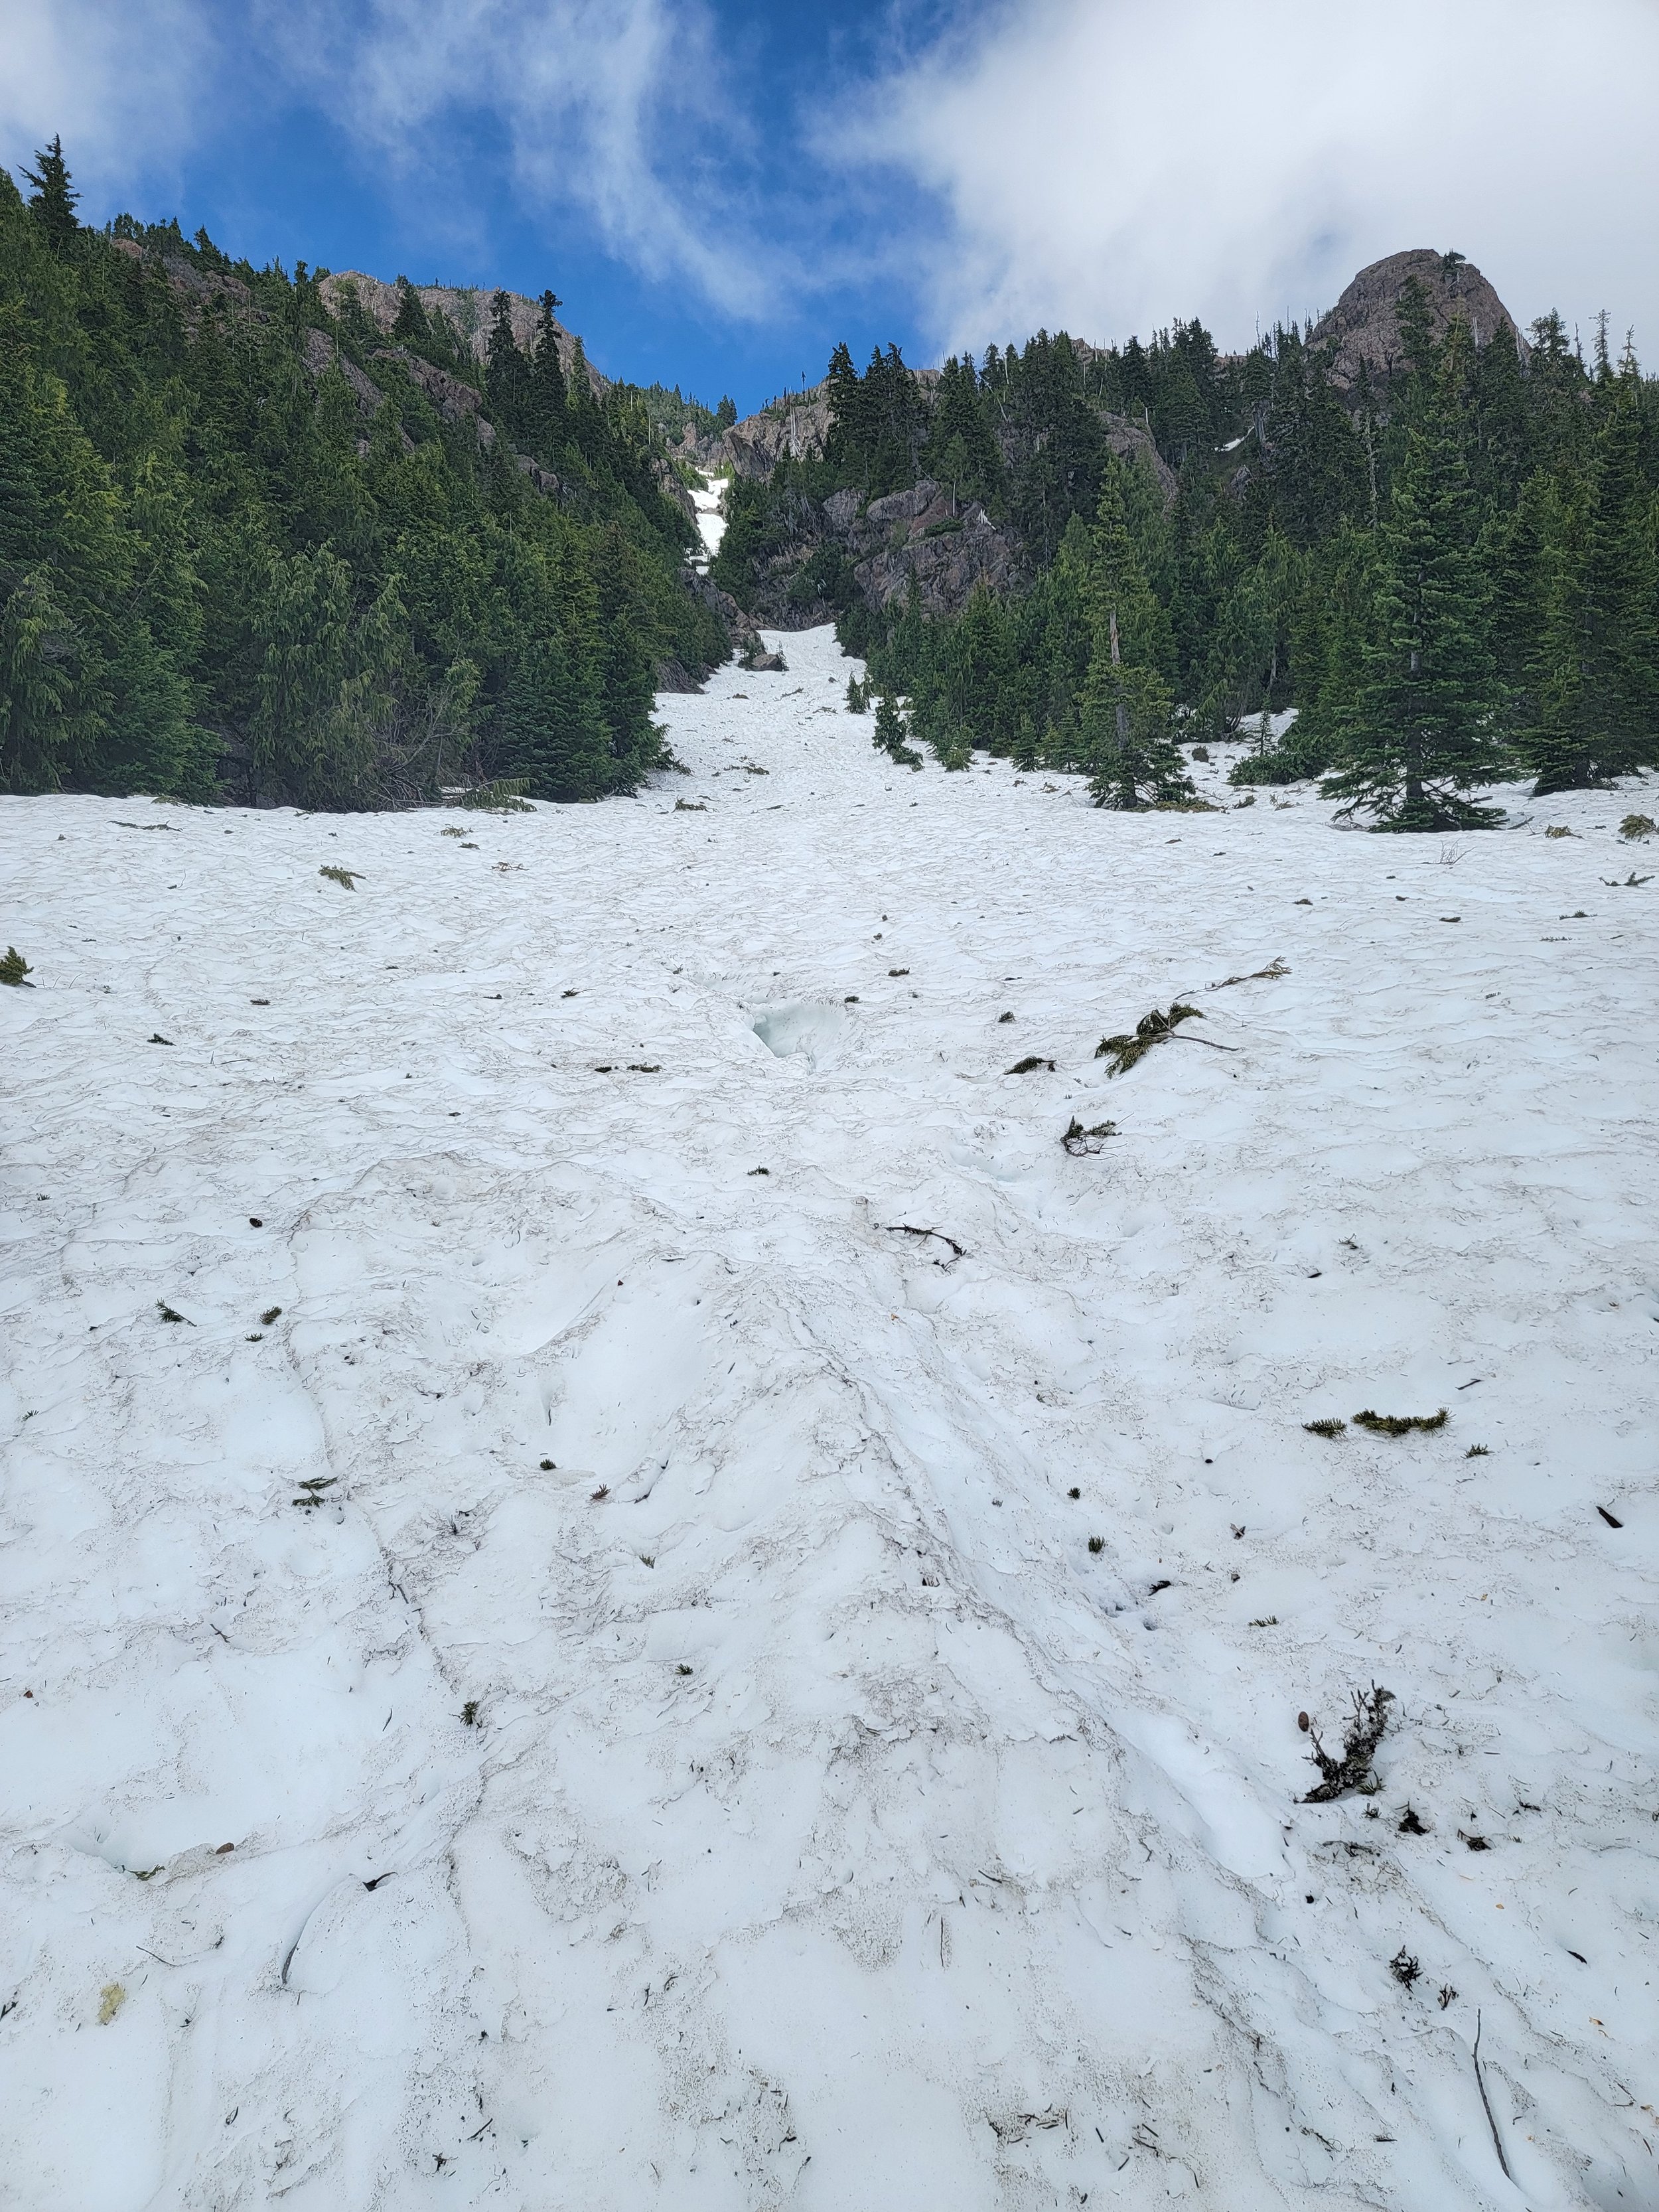  That’s the top there, about half a mile up. At this point it was really steep and the trail was just pure snow going over a rushing river. Since I was just wearing a t-shirt and shorts, didn’t really feel like falling into random icy streams as I st